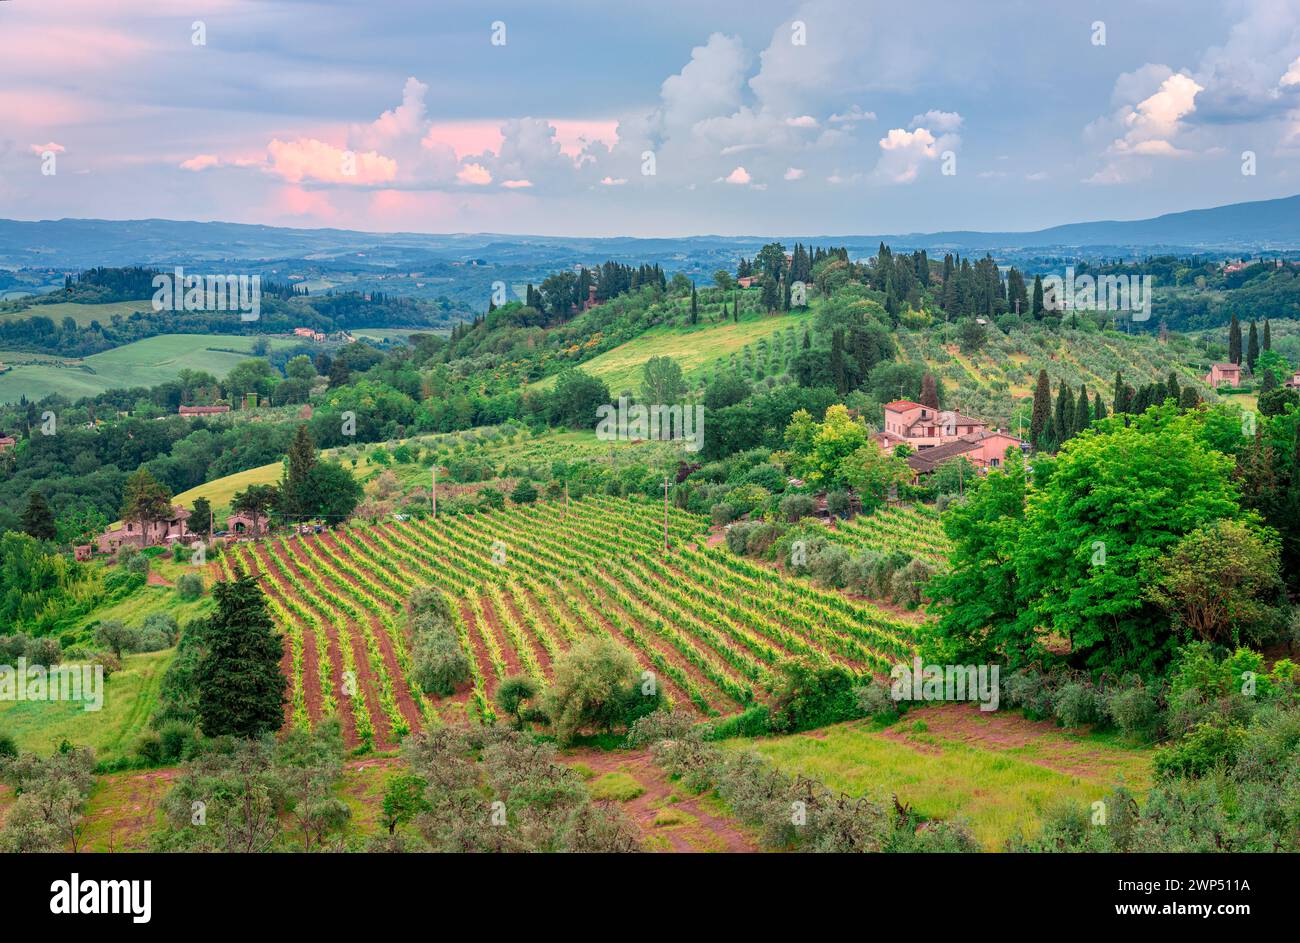 Scenic landscape with vineyards in Tuscany, Italy. Picture taken near San Gimignano. Stock Photo